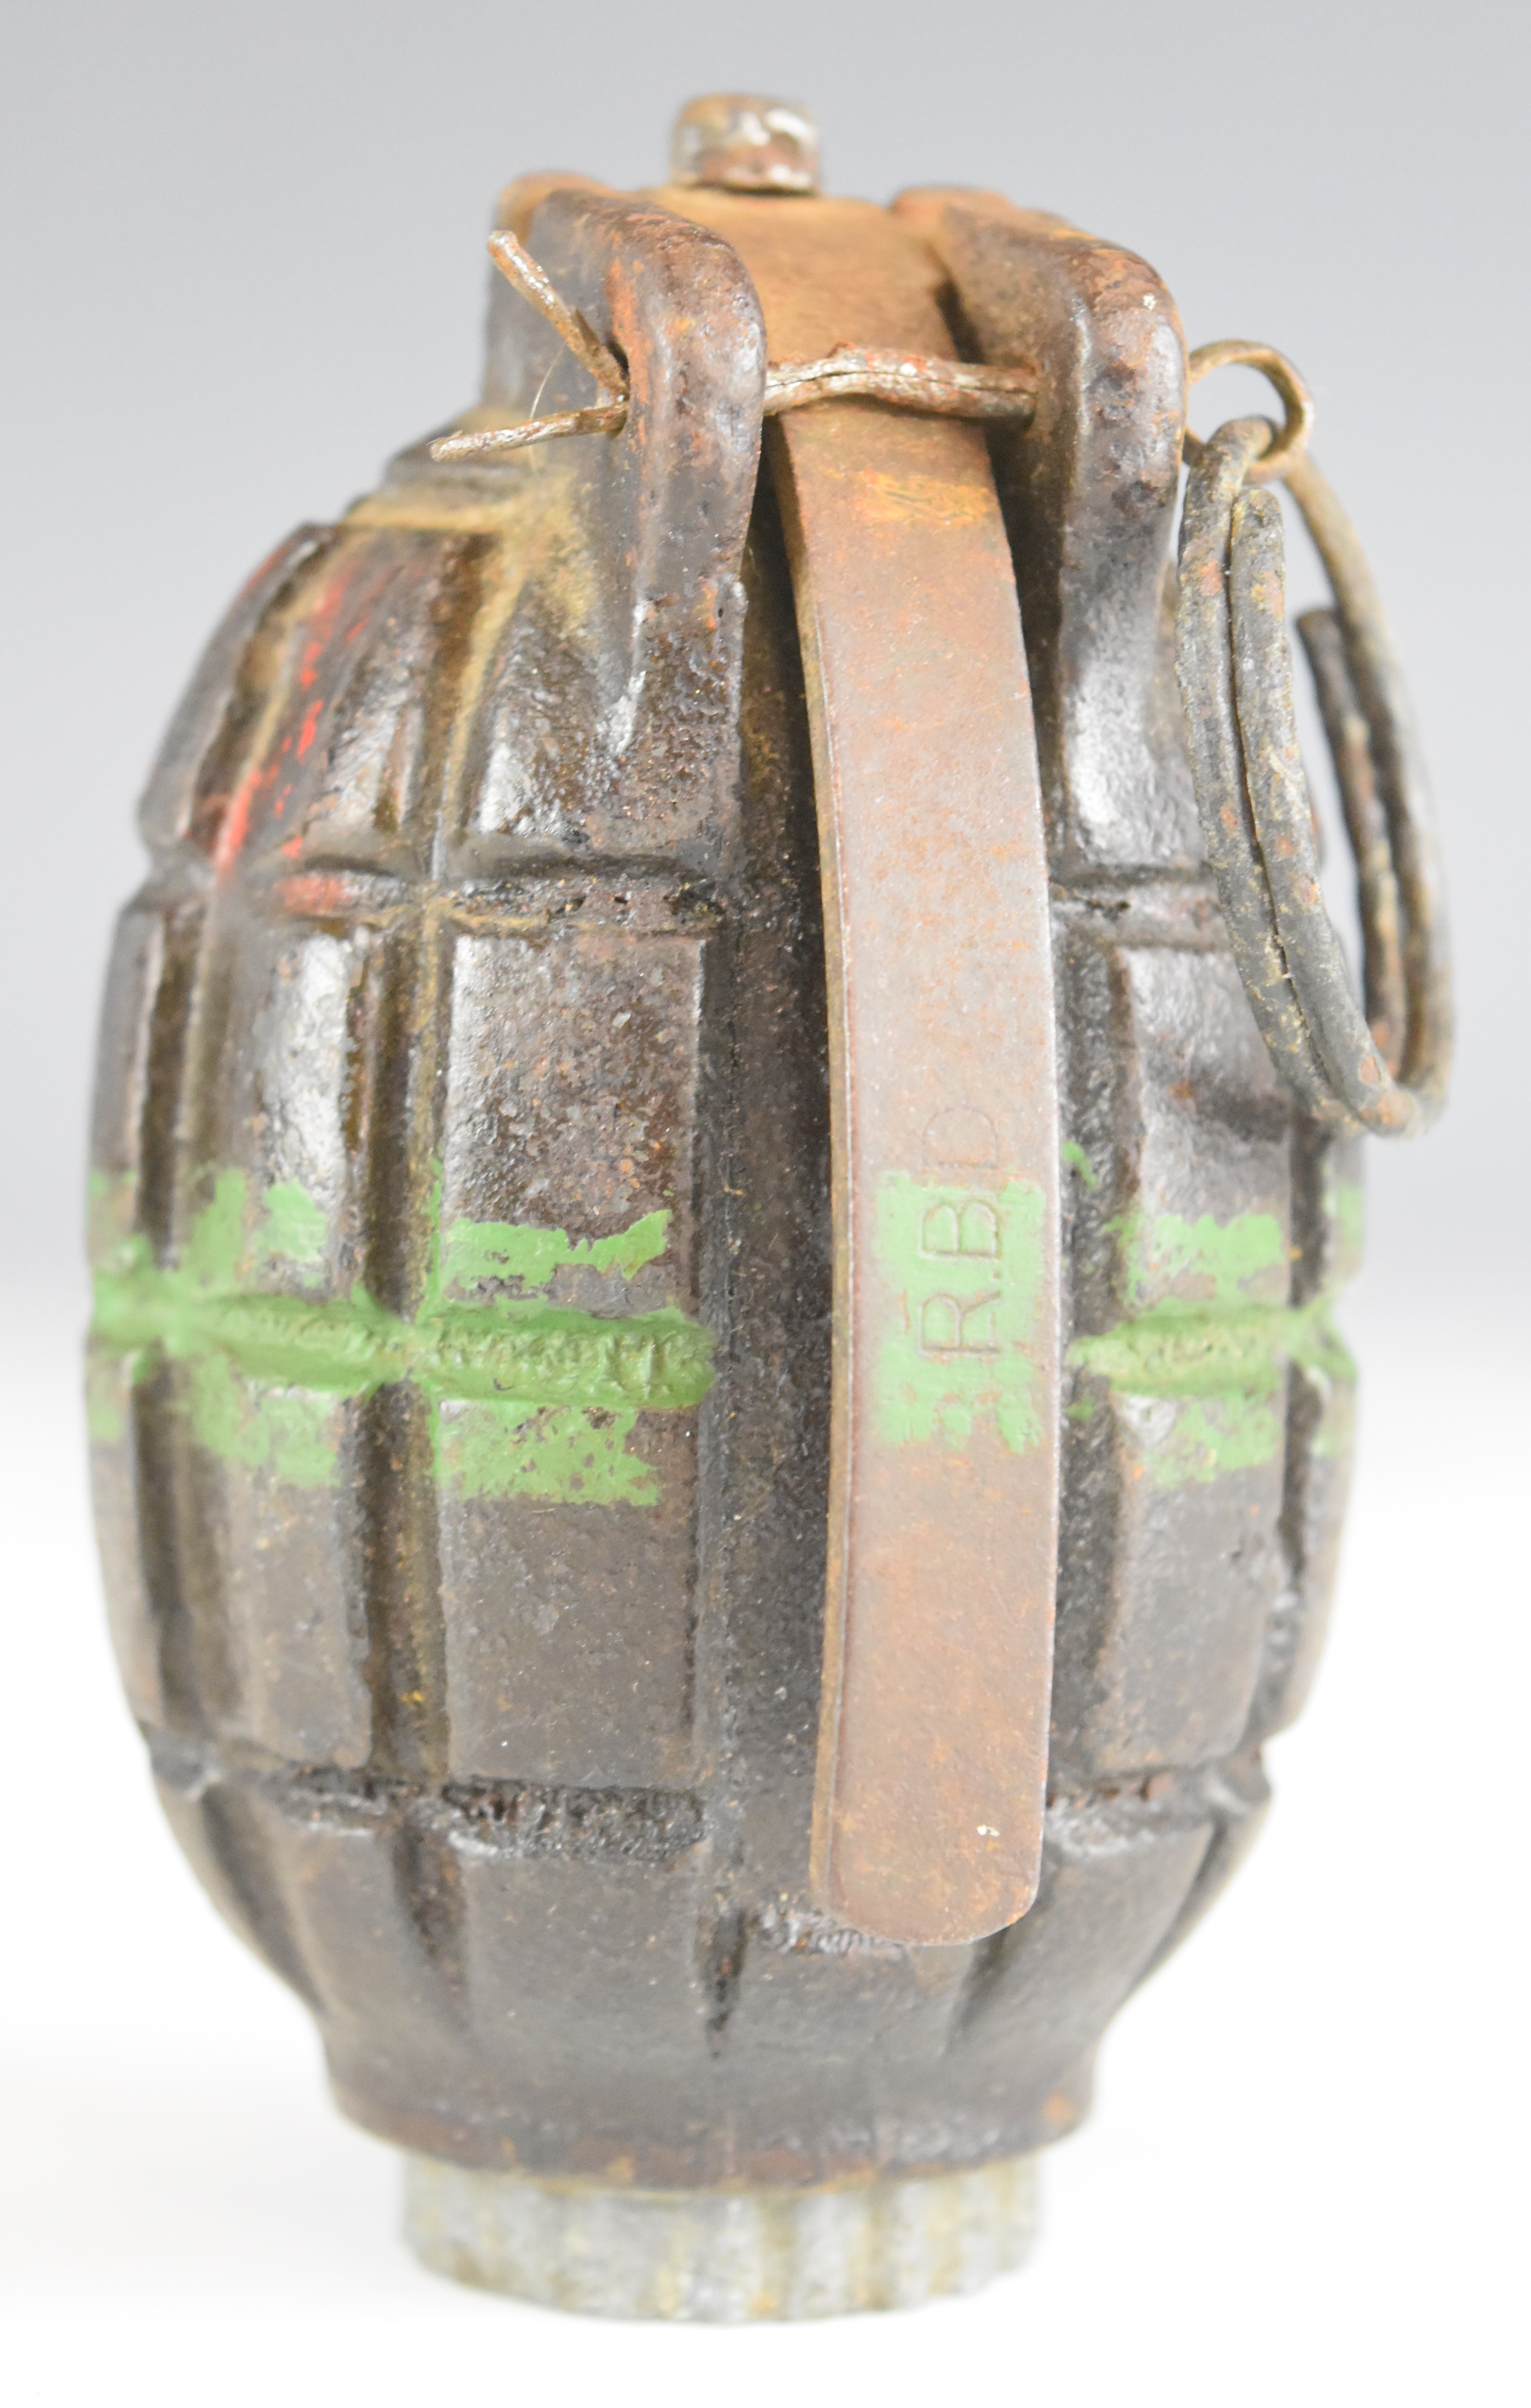 British WW2 inert Mills bomb / grenade stamped No 6 MZ MK I and SRD to alloy screw in base - Image 10 of 10